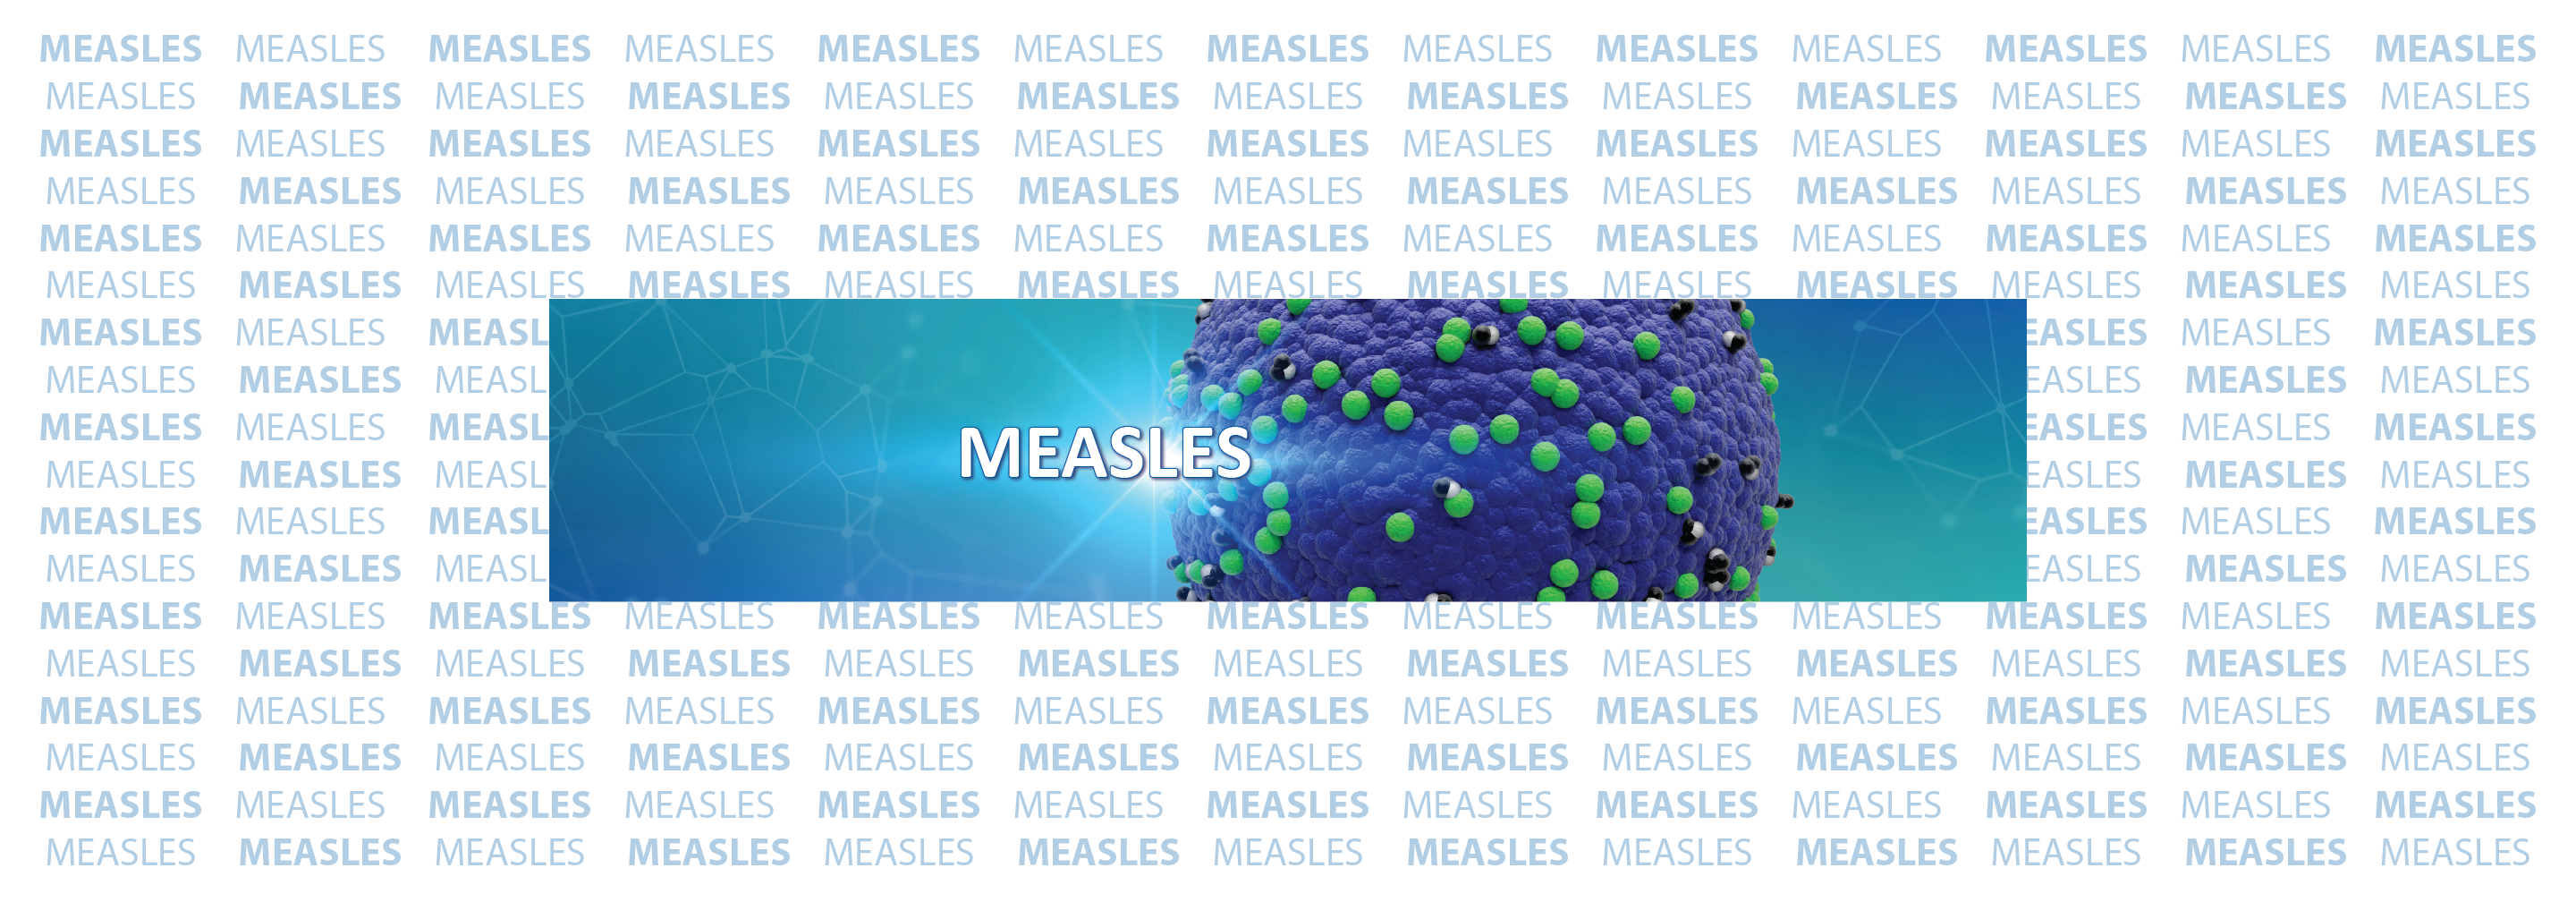 A banner image with the text Measles